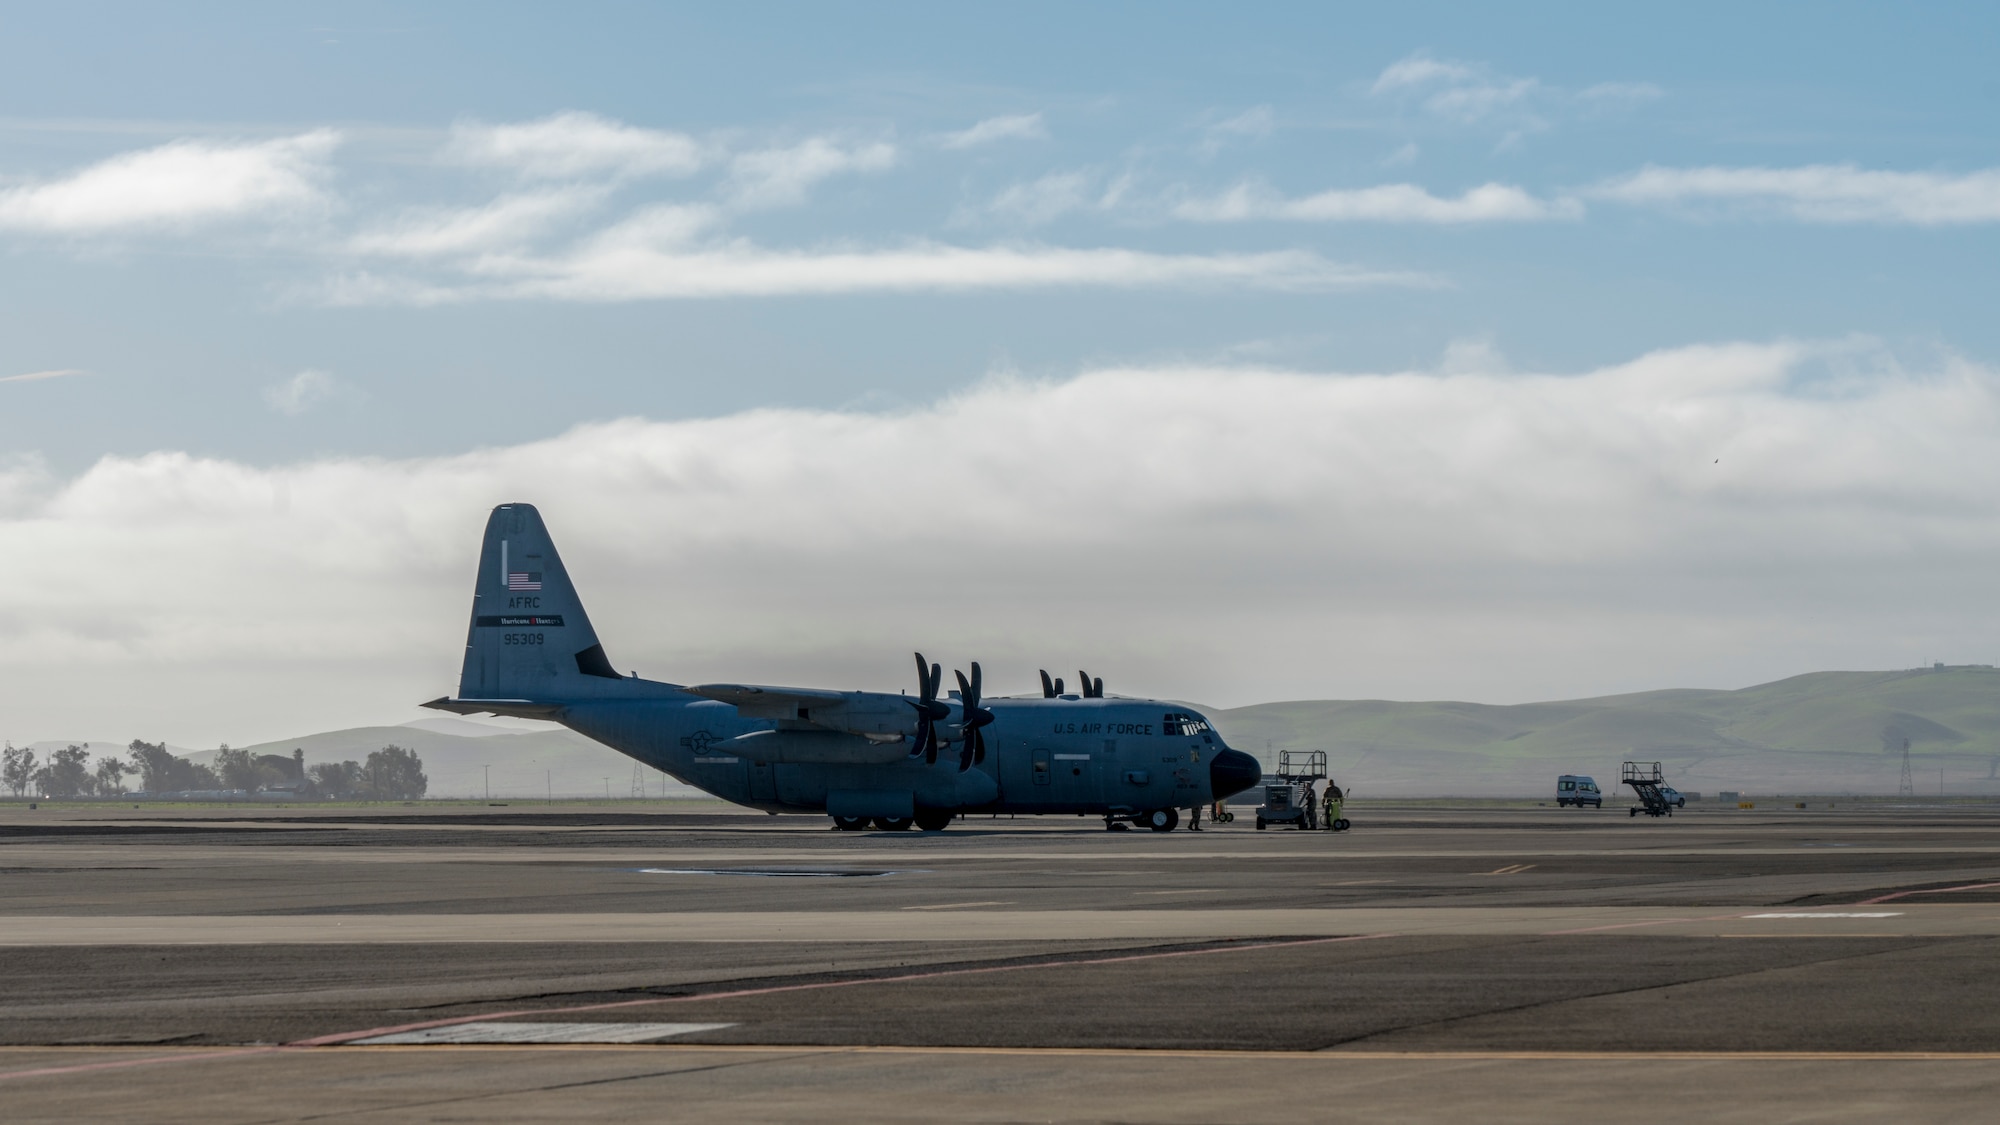 A WC-130J Super Hercules aircraft from the 53rd Weather Reconnaissance Squadron sits on the flightline prior to an atmospheric river mission Jan. 27 at Travis Air Force Base, Calif. The Hurricane Hunters are slated to perform “AR recon” from January through March. Scientists led by Scripps Institution of Oceanography at University of California, San Diego, in partnership with the 53rd WRS, National Oceanic and Atmospheric Aviation’s National Weather Service and Office of Marine and Aviation Operations, will be on standby to fly through these ARs over the Pacific to gather data to improve forecasts. (U.S. Air Force photo by Tech. Sgt. Christopher Carranza)